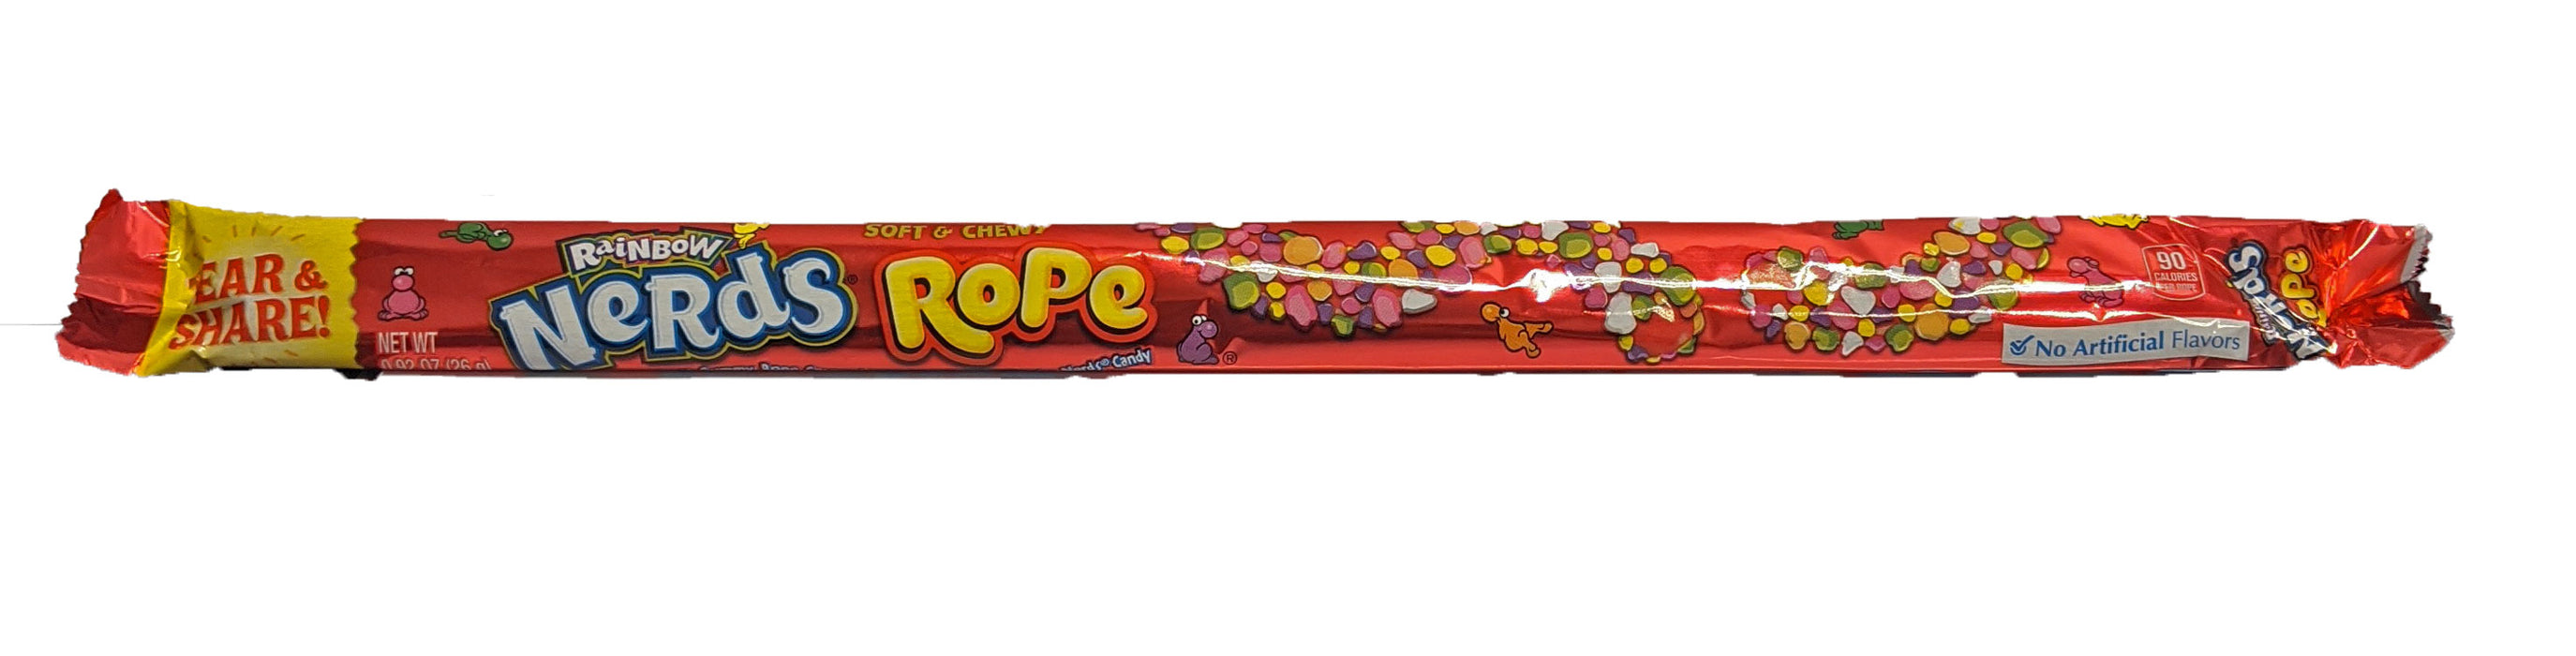 Nerds Rope Rainbow .92oz Rope or 24 Count Box